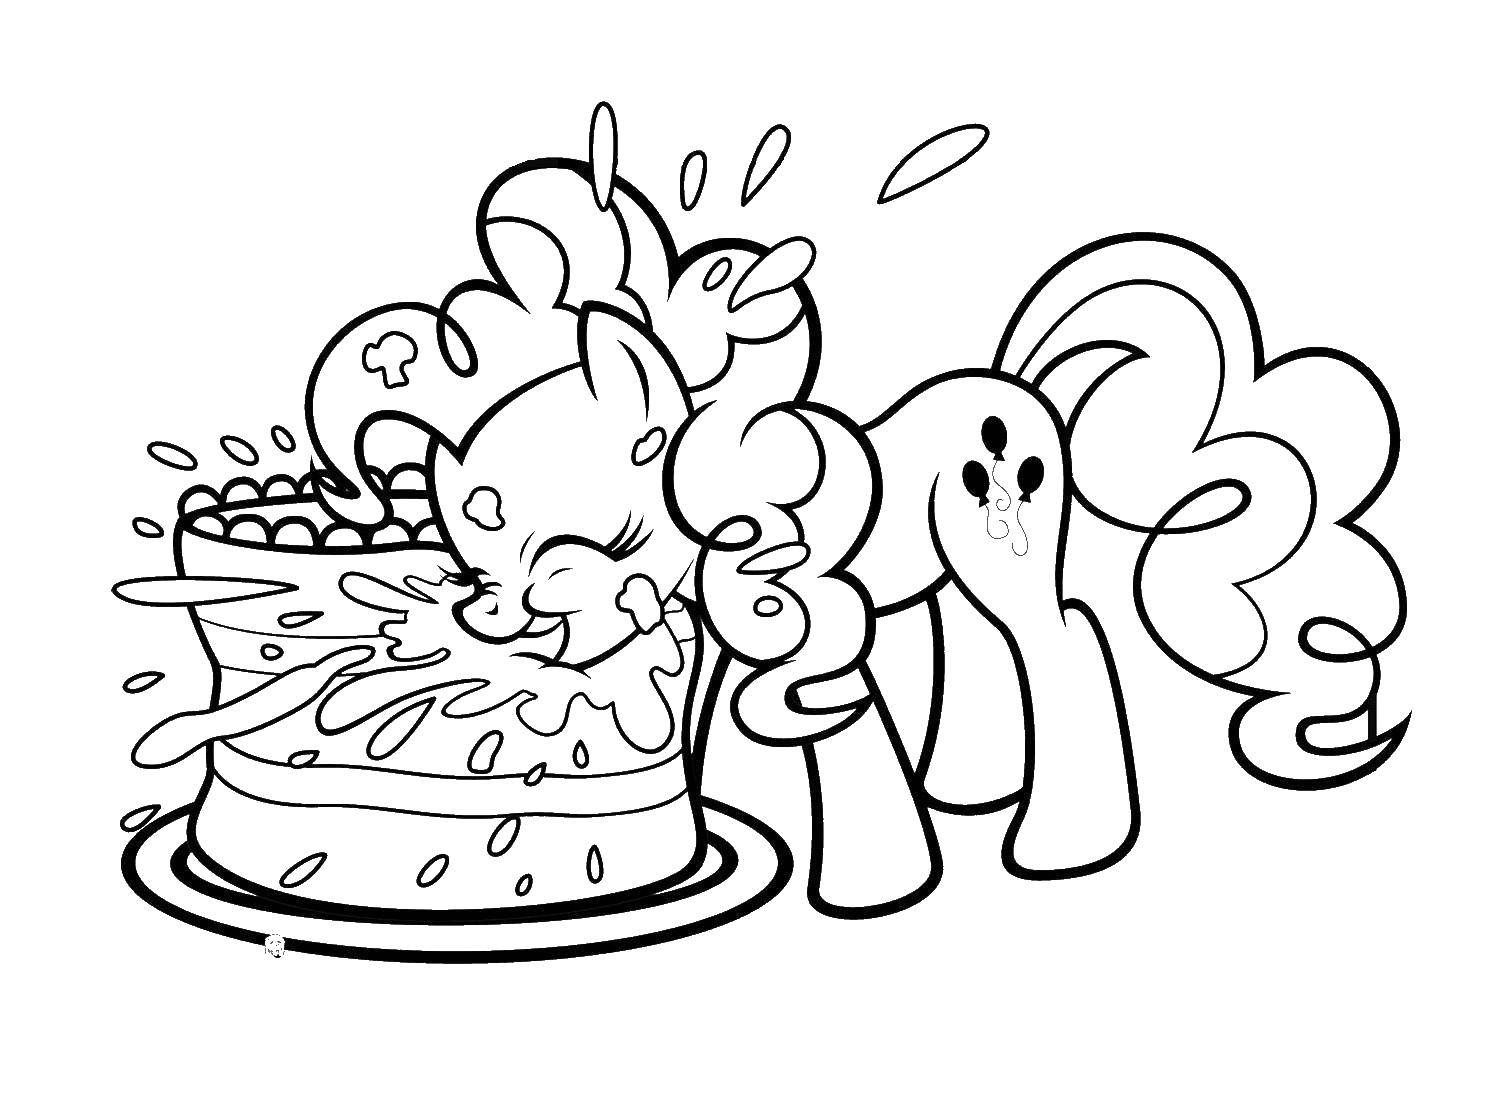 Coloring The pony eats the cake. Category Ponies. Tags:  Pony, My little pony.